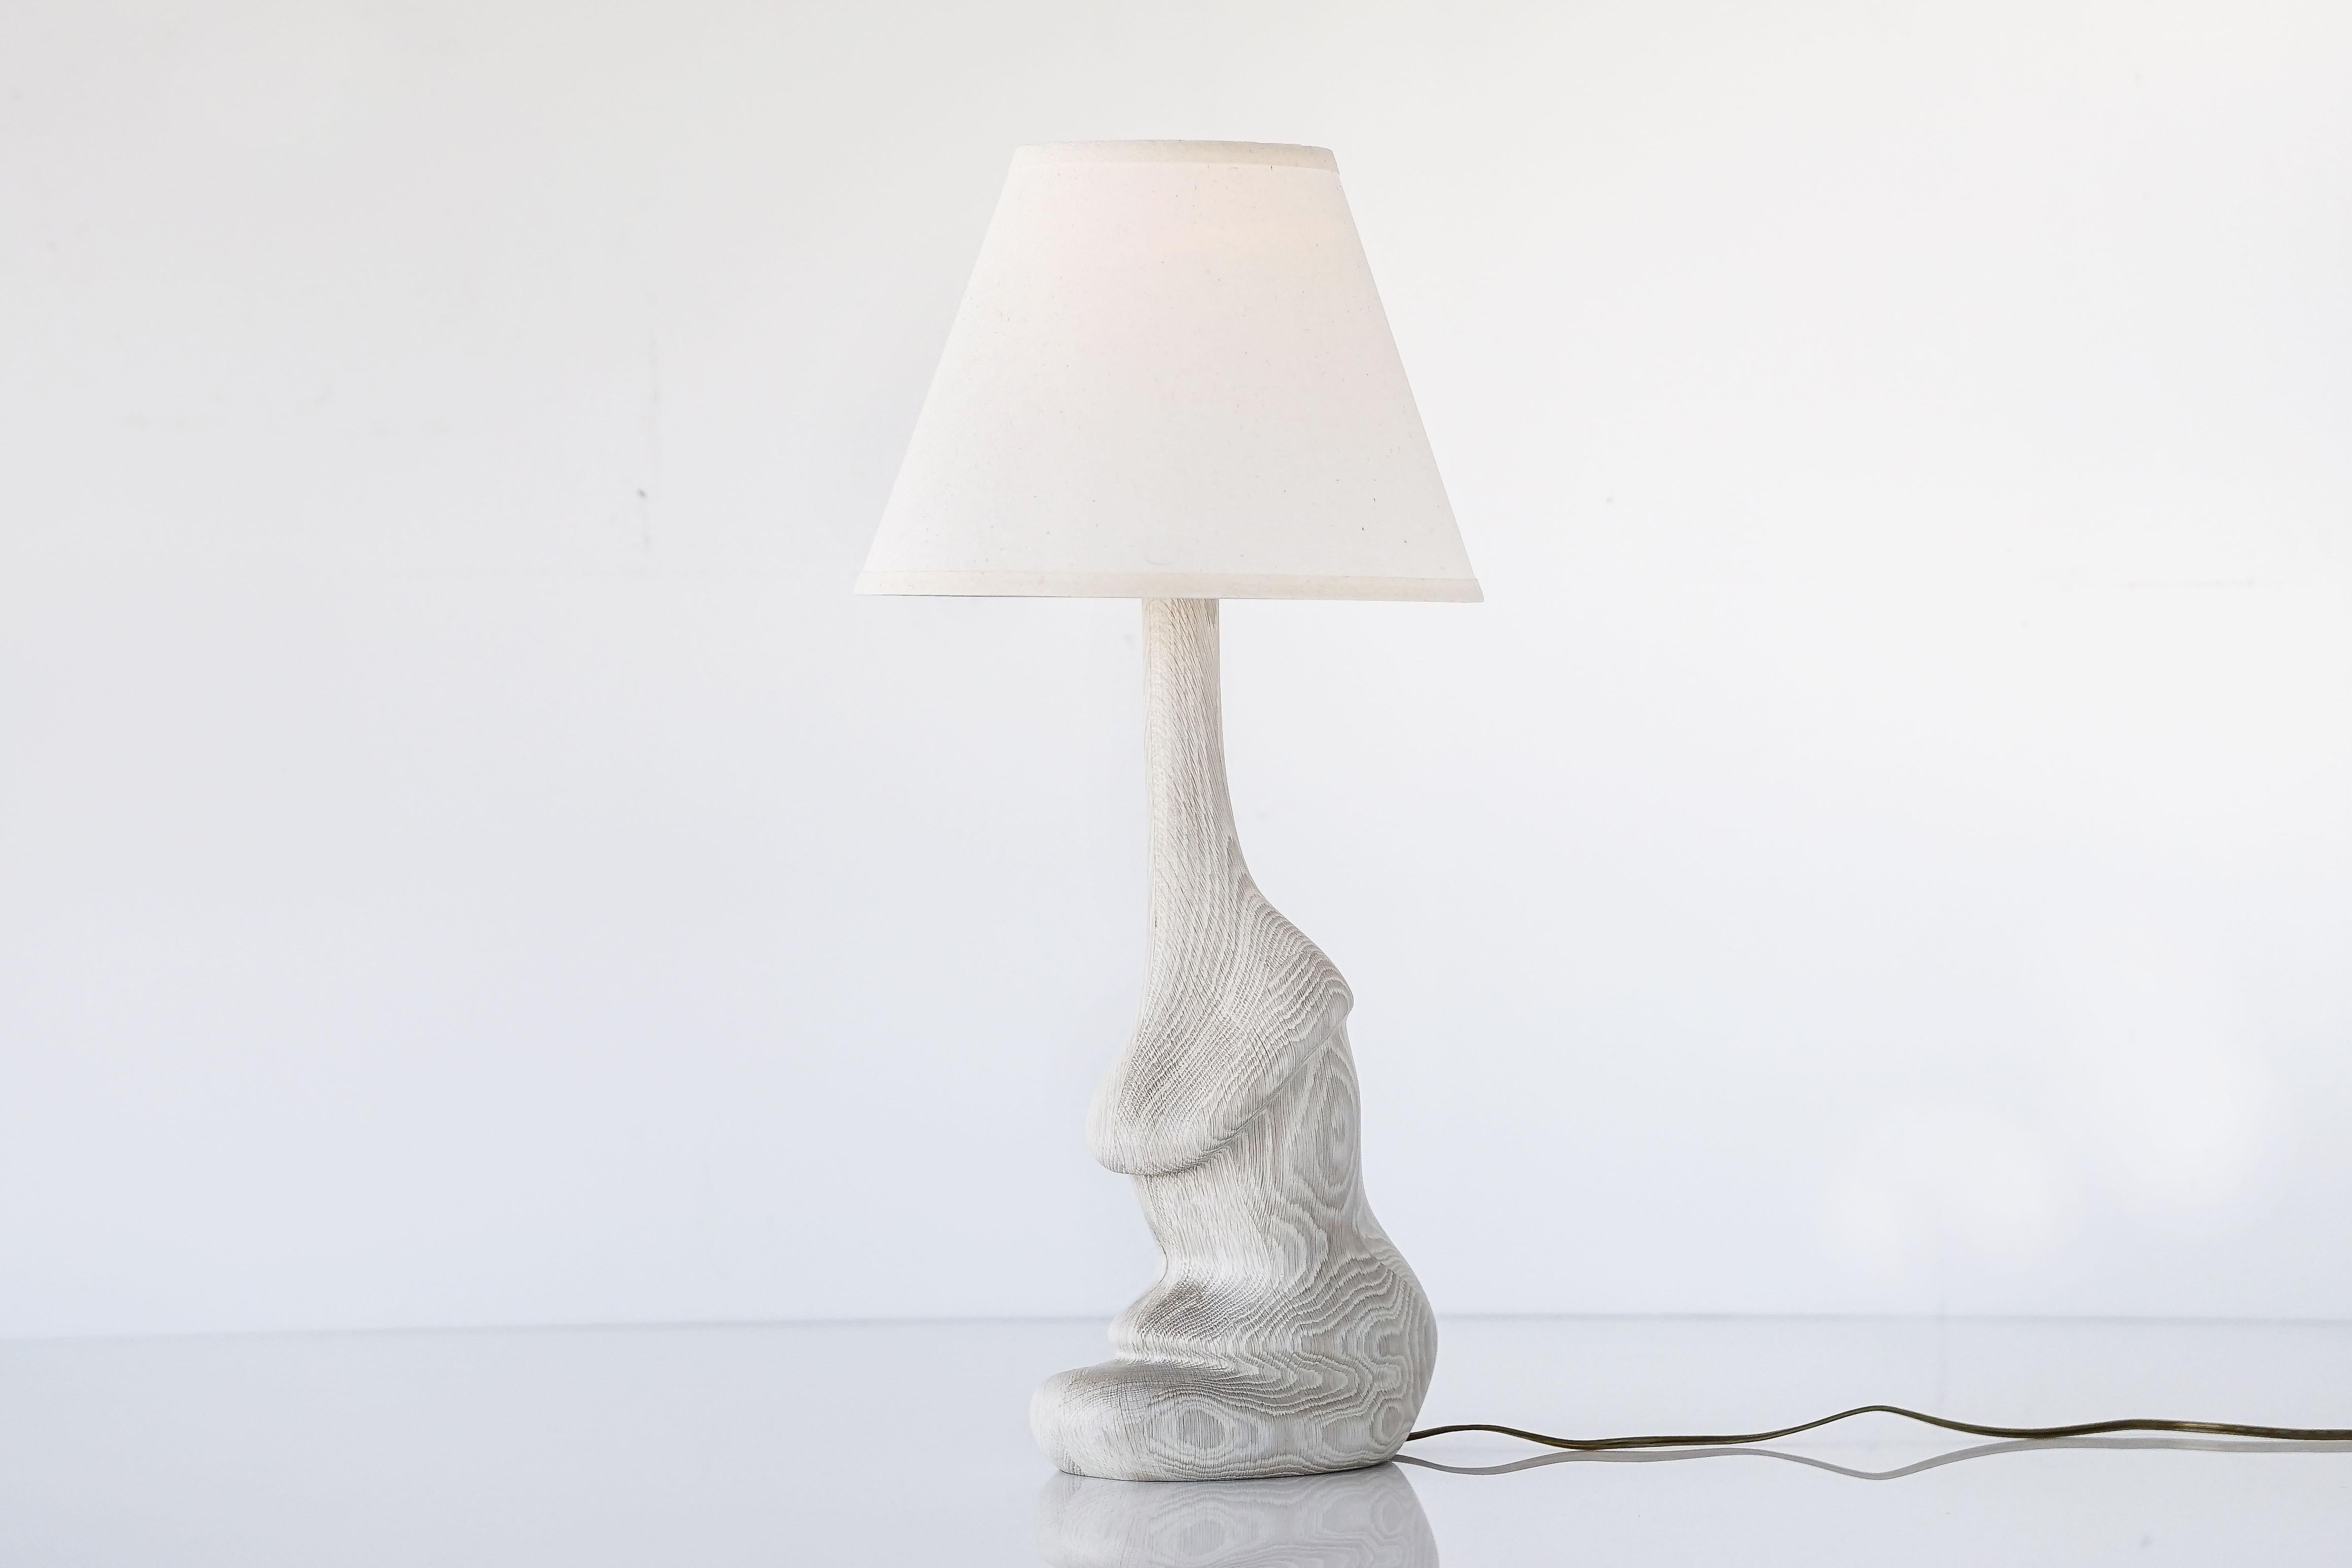 Carved solid white oakwood table lamp inspired by mushrooms. 

Shown in bleached white oak with wax finish with white linen lamp shade. 

Custom wood types available. 

Custom lamp shade available.